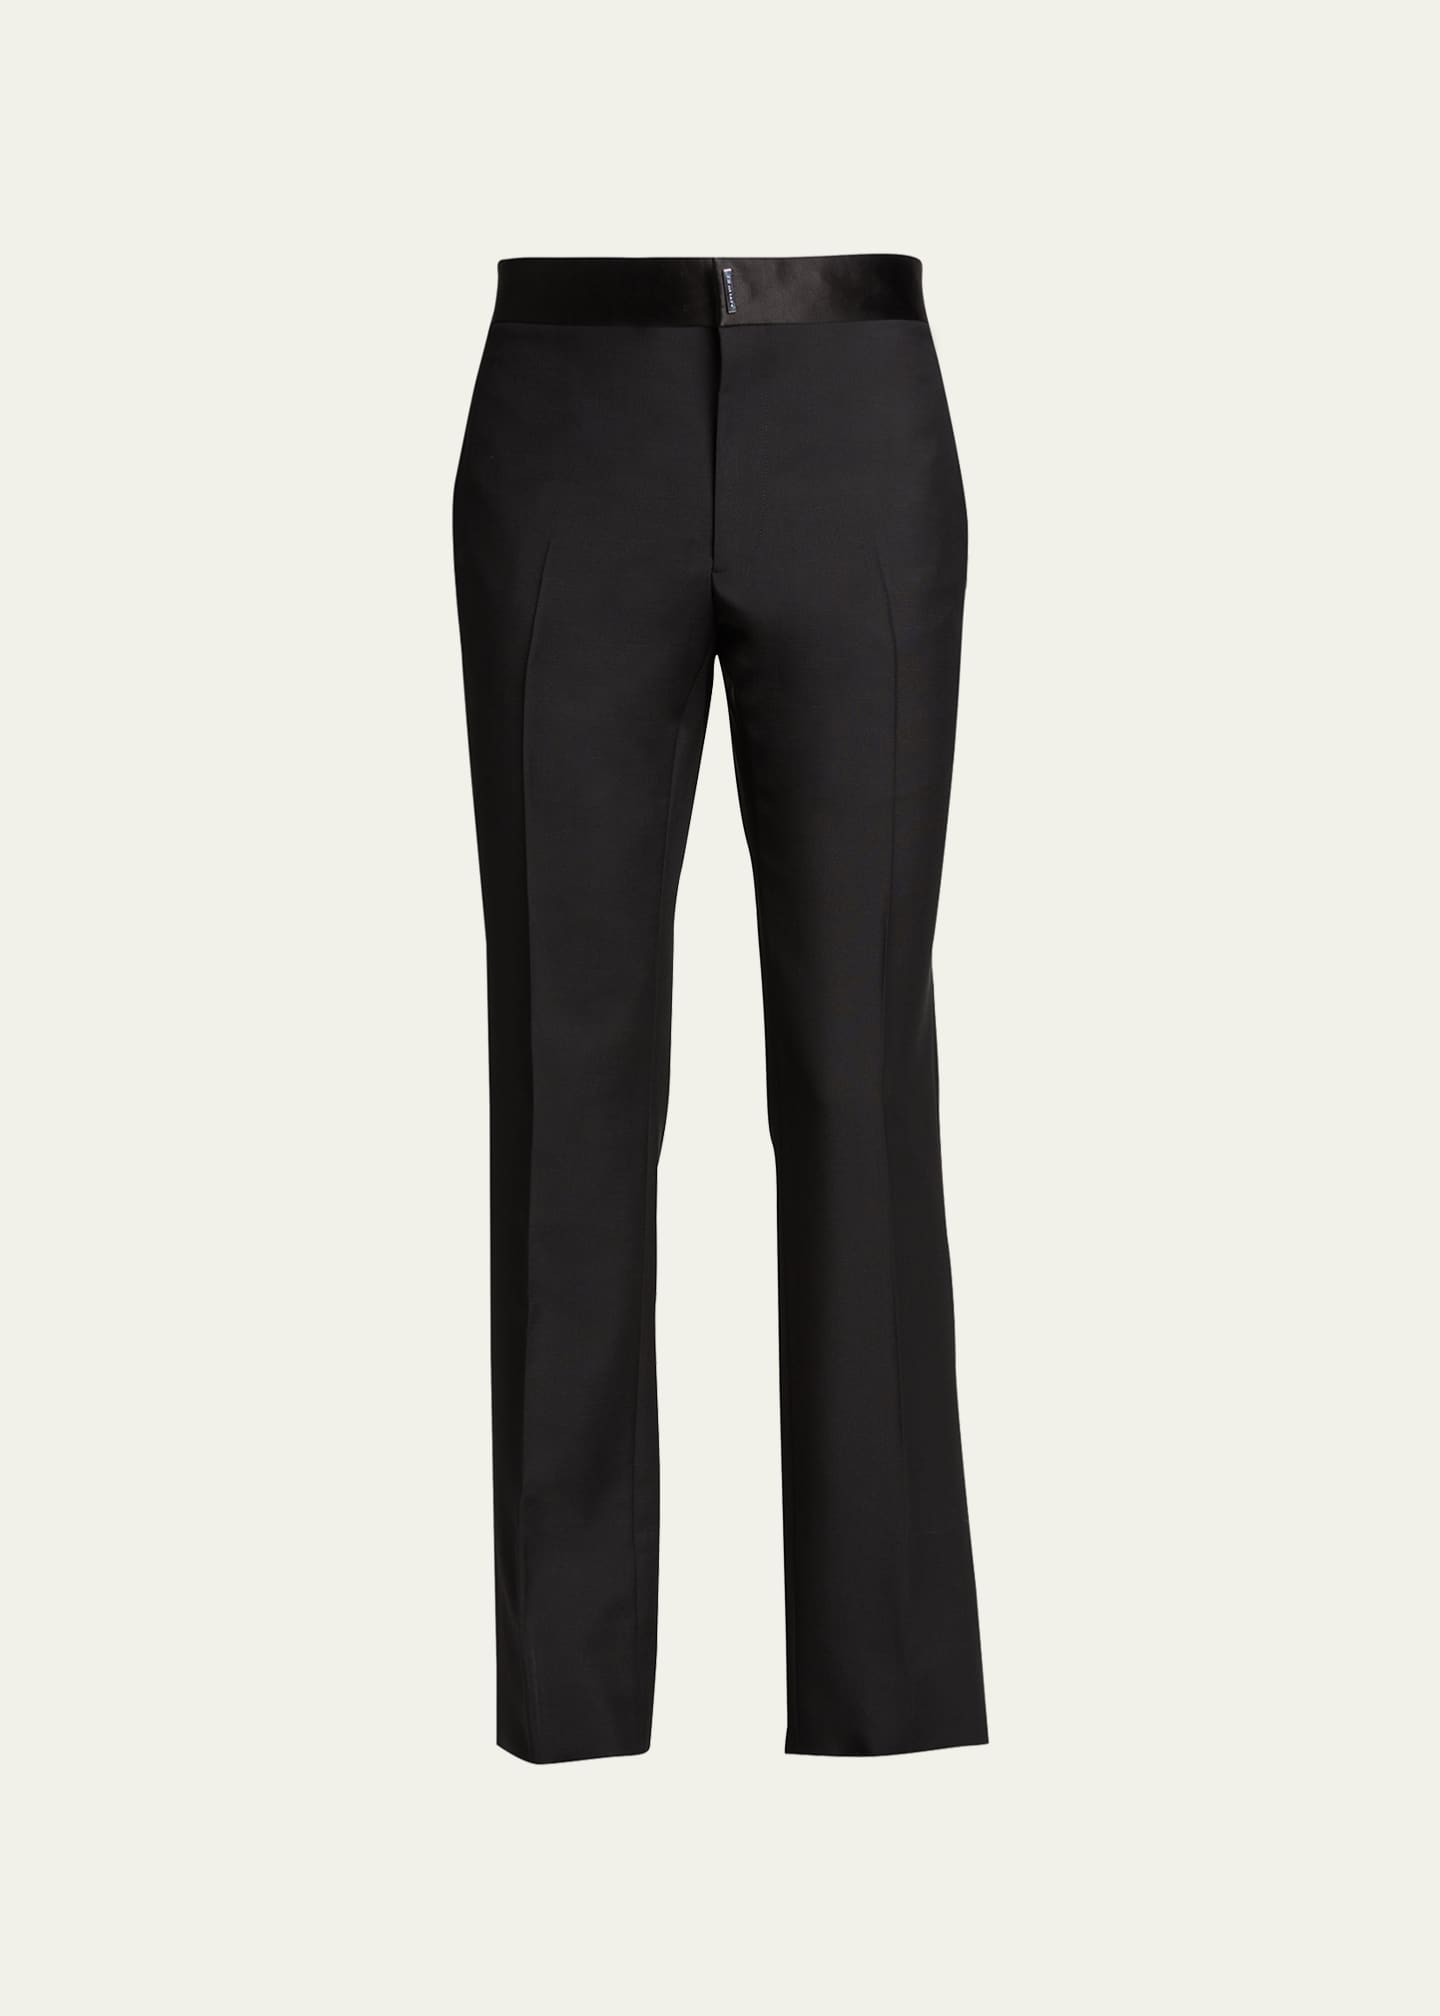 Givenchy Men's Classic-Fit Tuxedo Trousers - Bergdorf Goodman